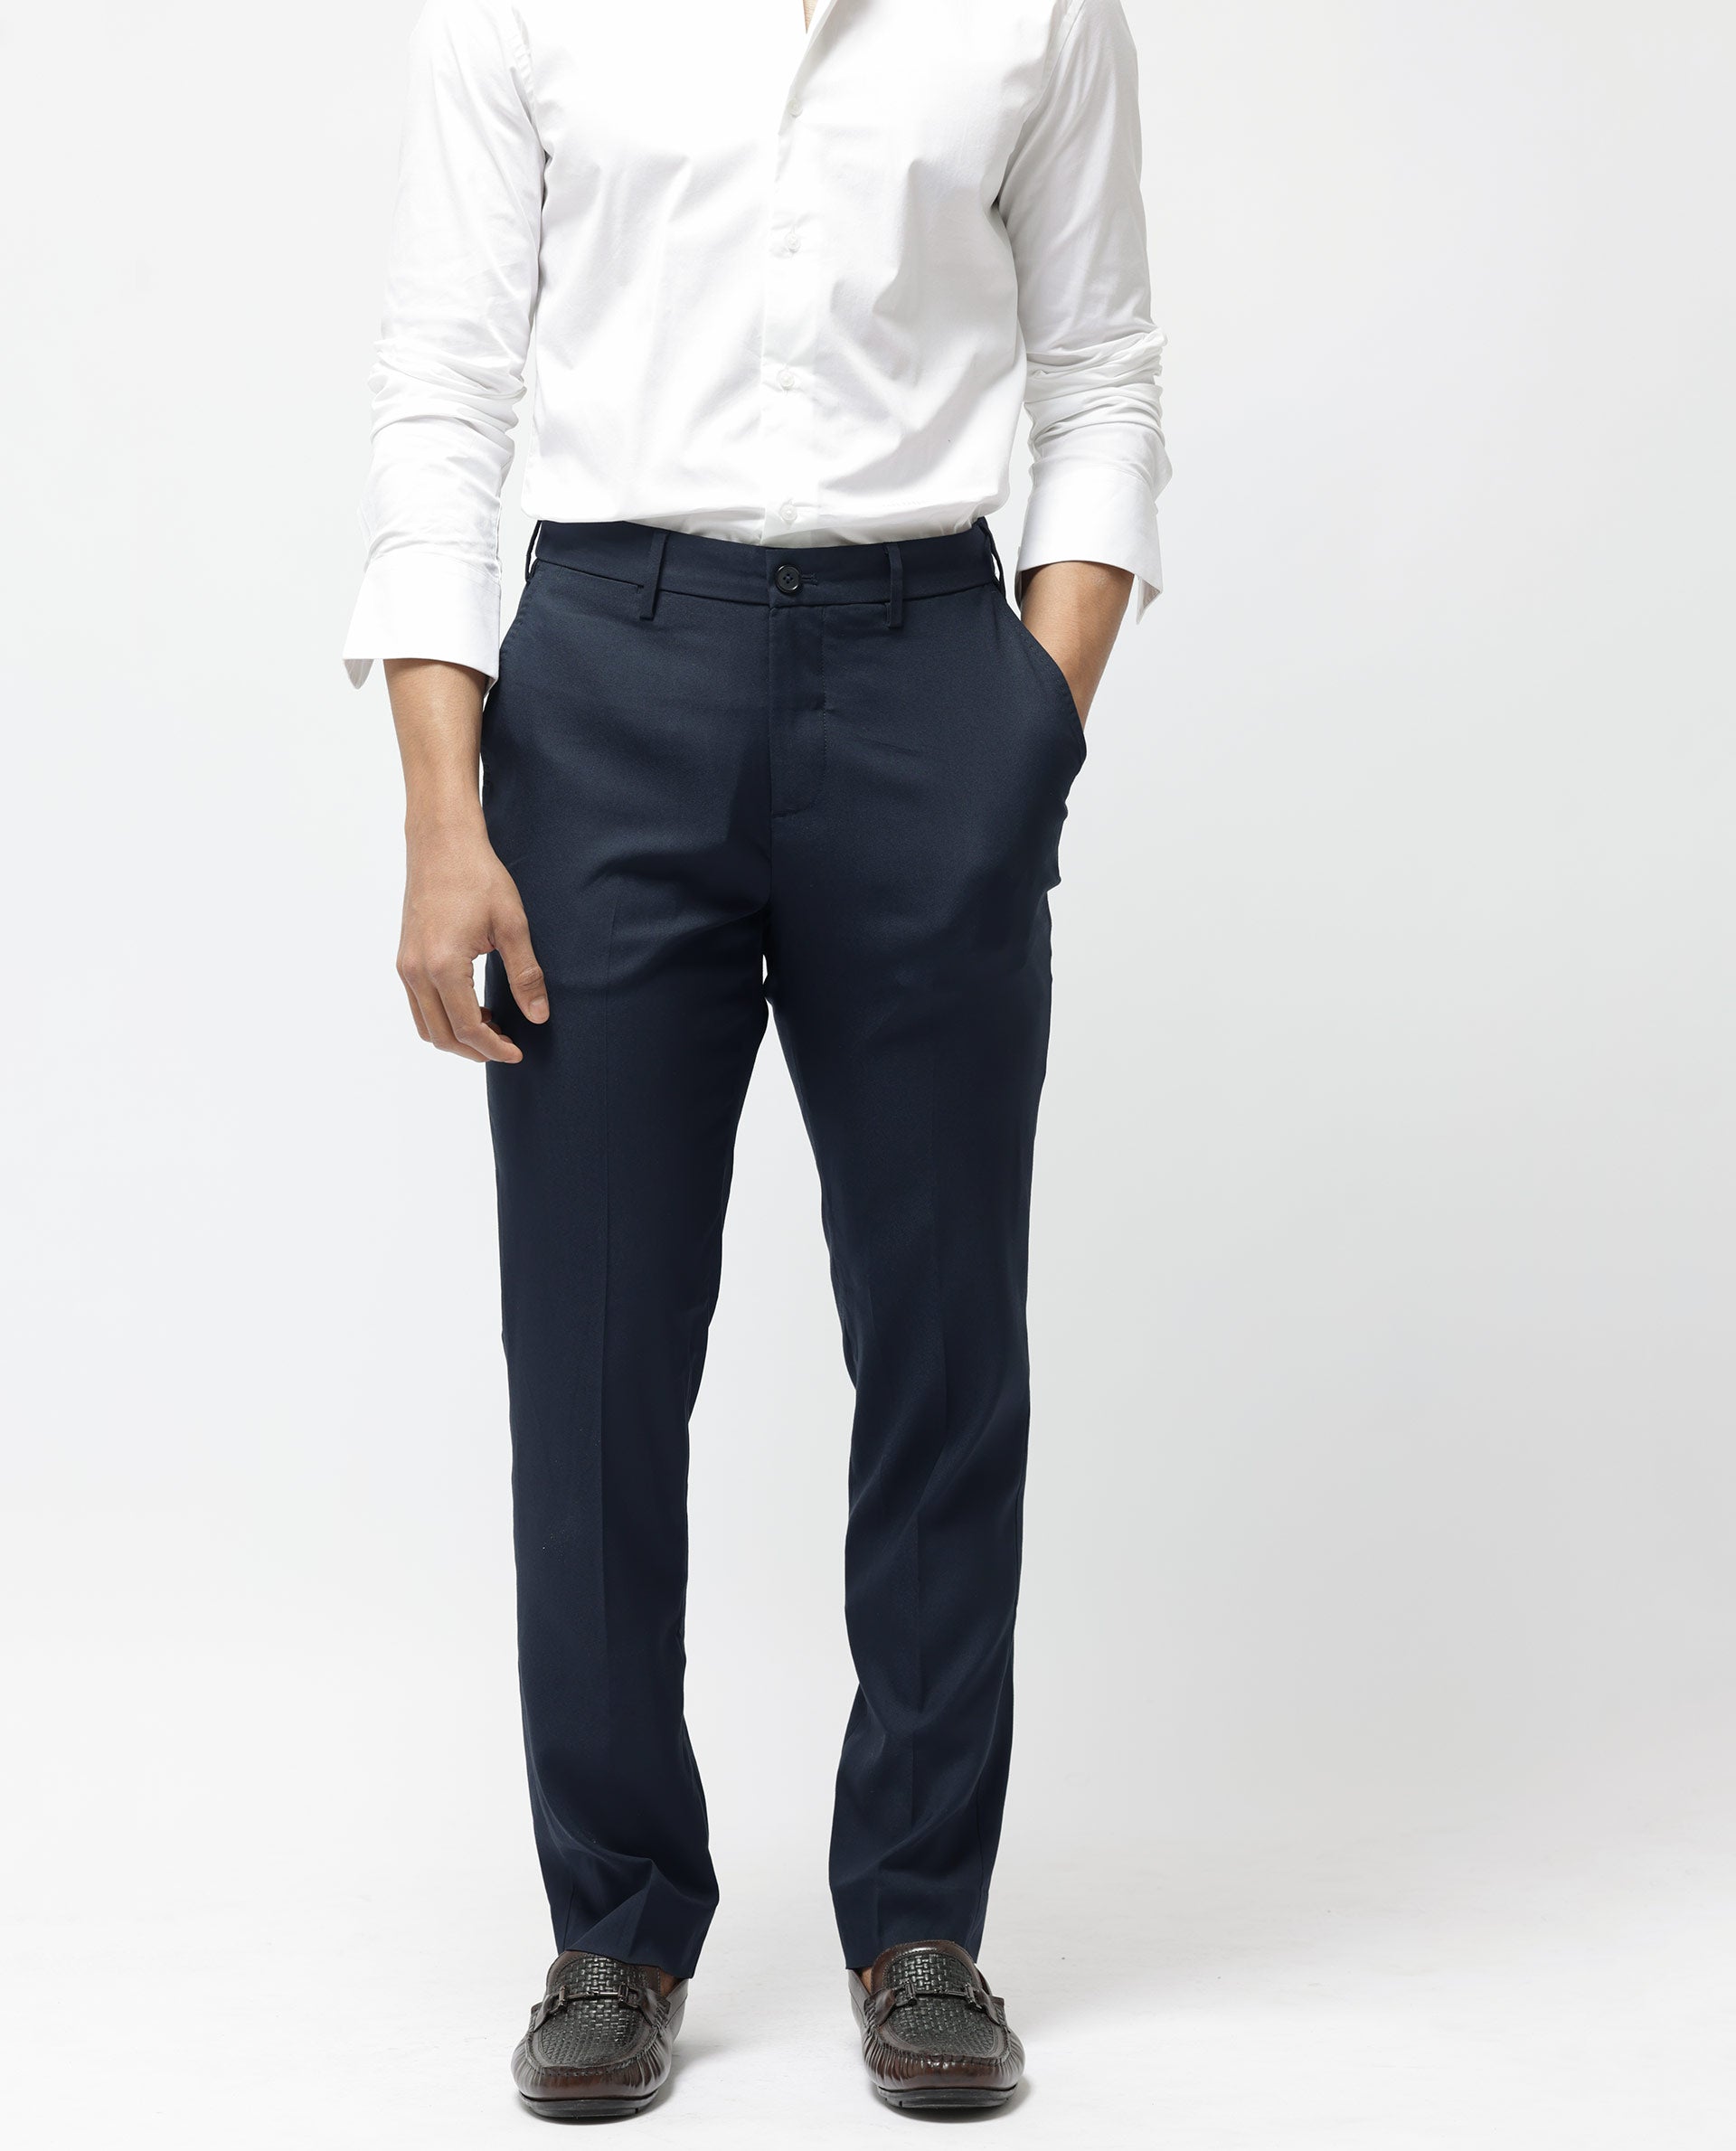 Slim Fit Black Stretch Trousers | Buy Online at Moss